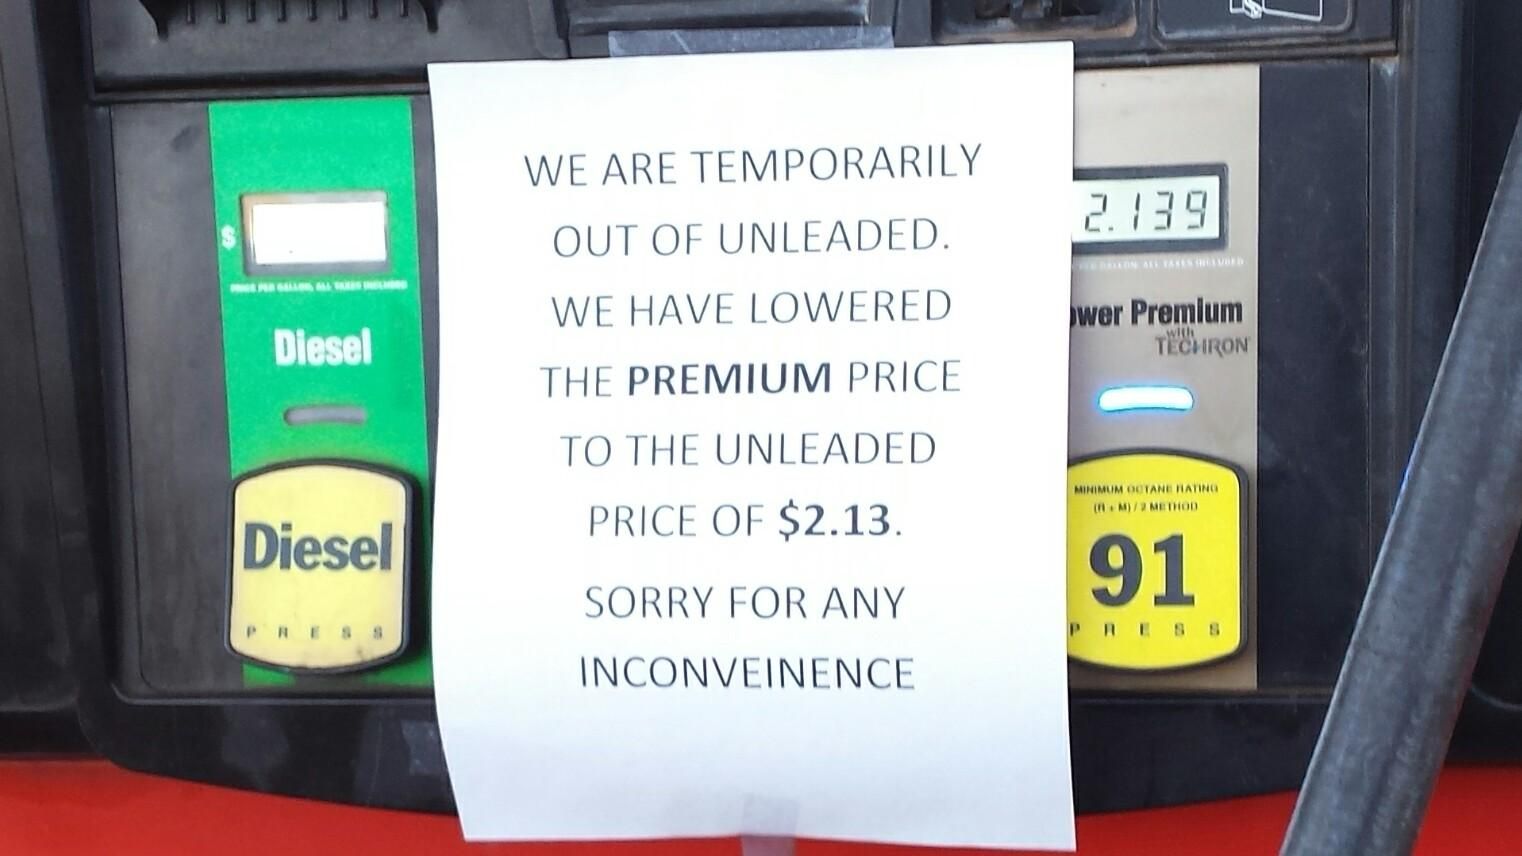 You call this an inconvenience???